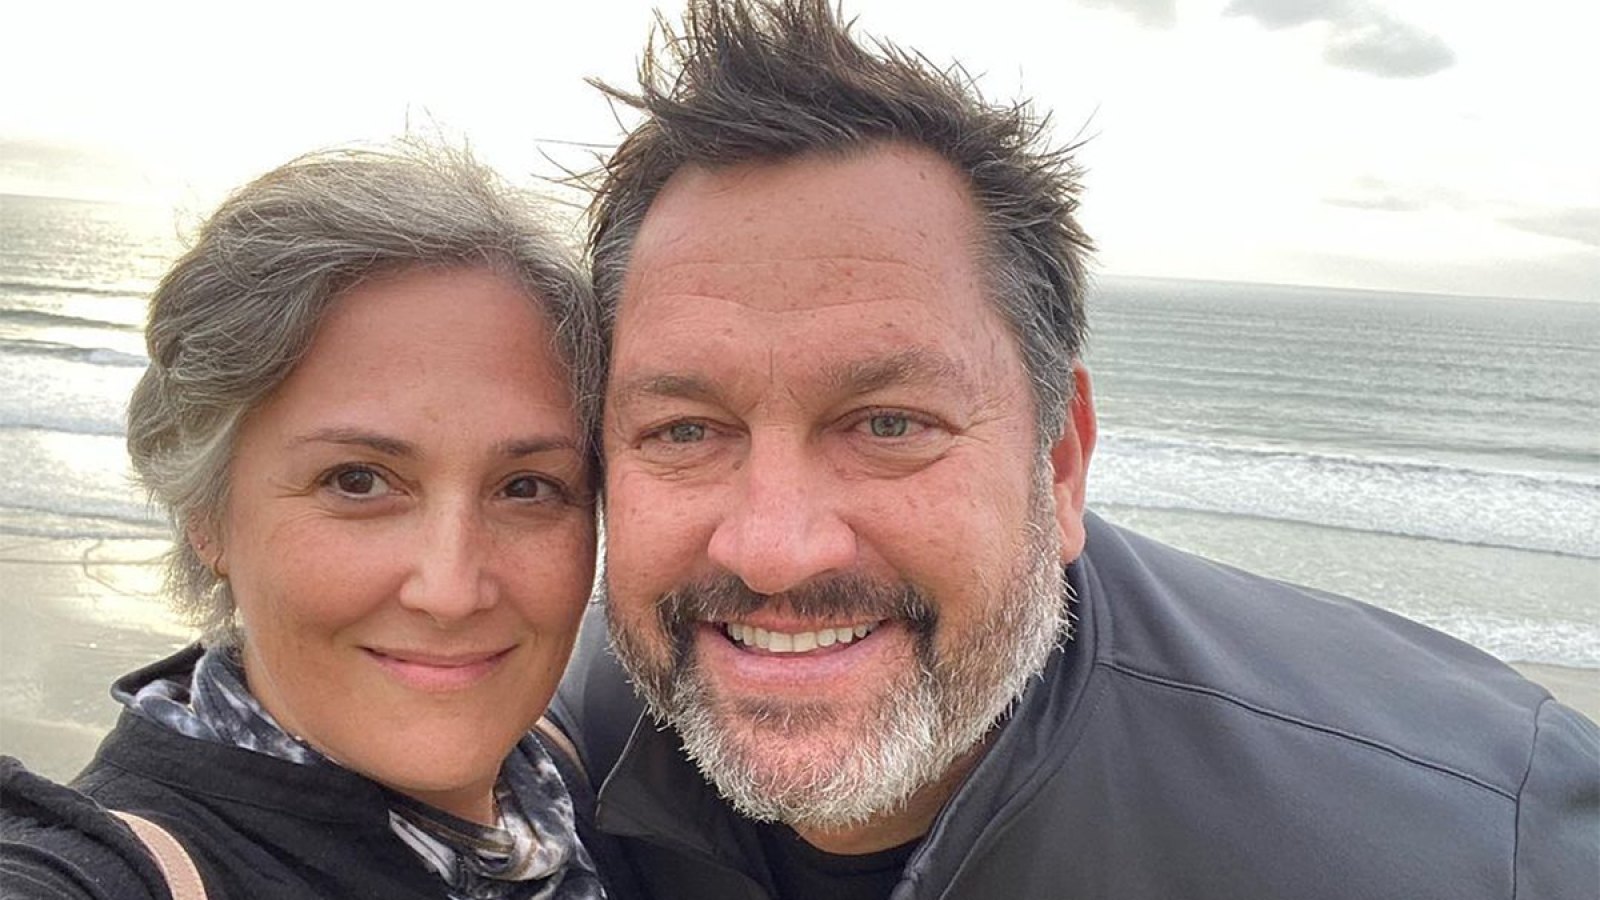 Ricki Lake Marries Fiance Ross Burningham Nearly 1 Year After Engagement